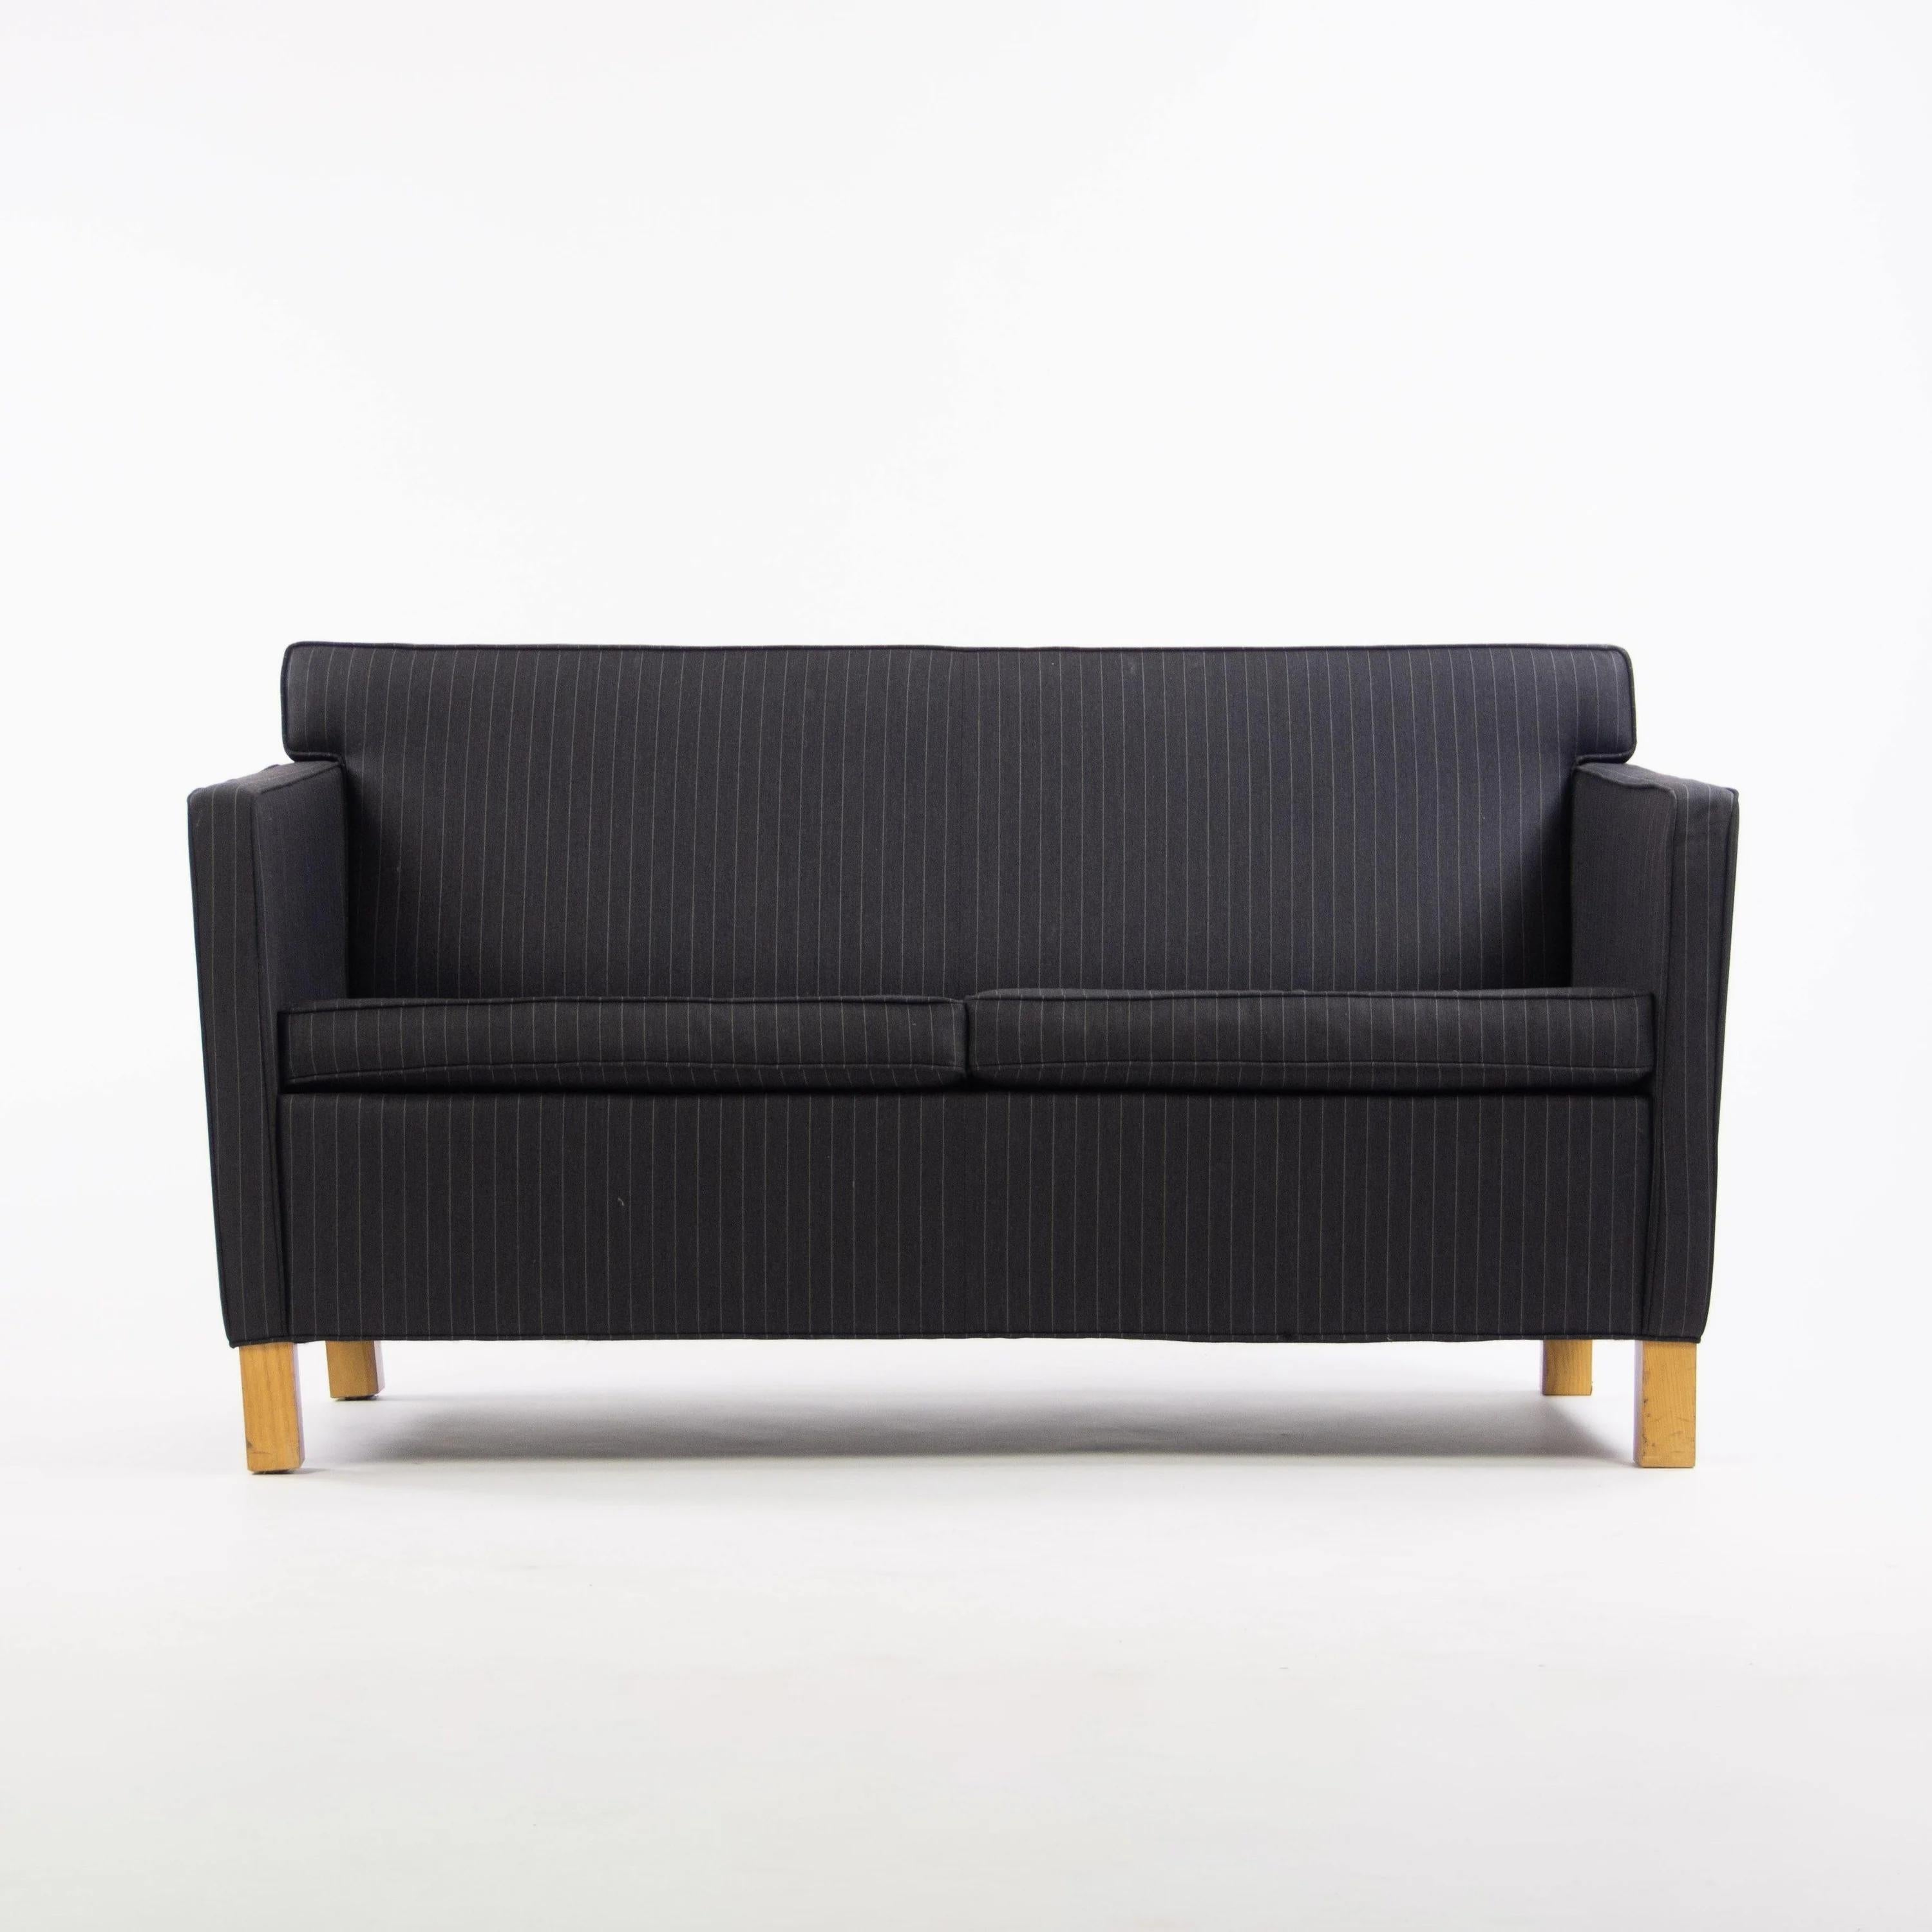 This rare Knoll Krefeld settee has been with us in our storefront gallery since we began fabricating our pieces. This one is a dark navy blue design with pinstripe fabric. Solid volume with Bauhaus personality. This is a different kind of aesthetic